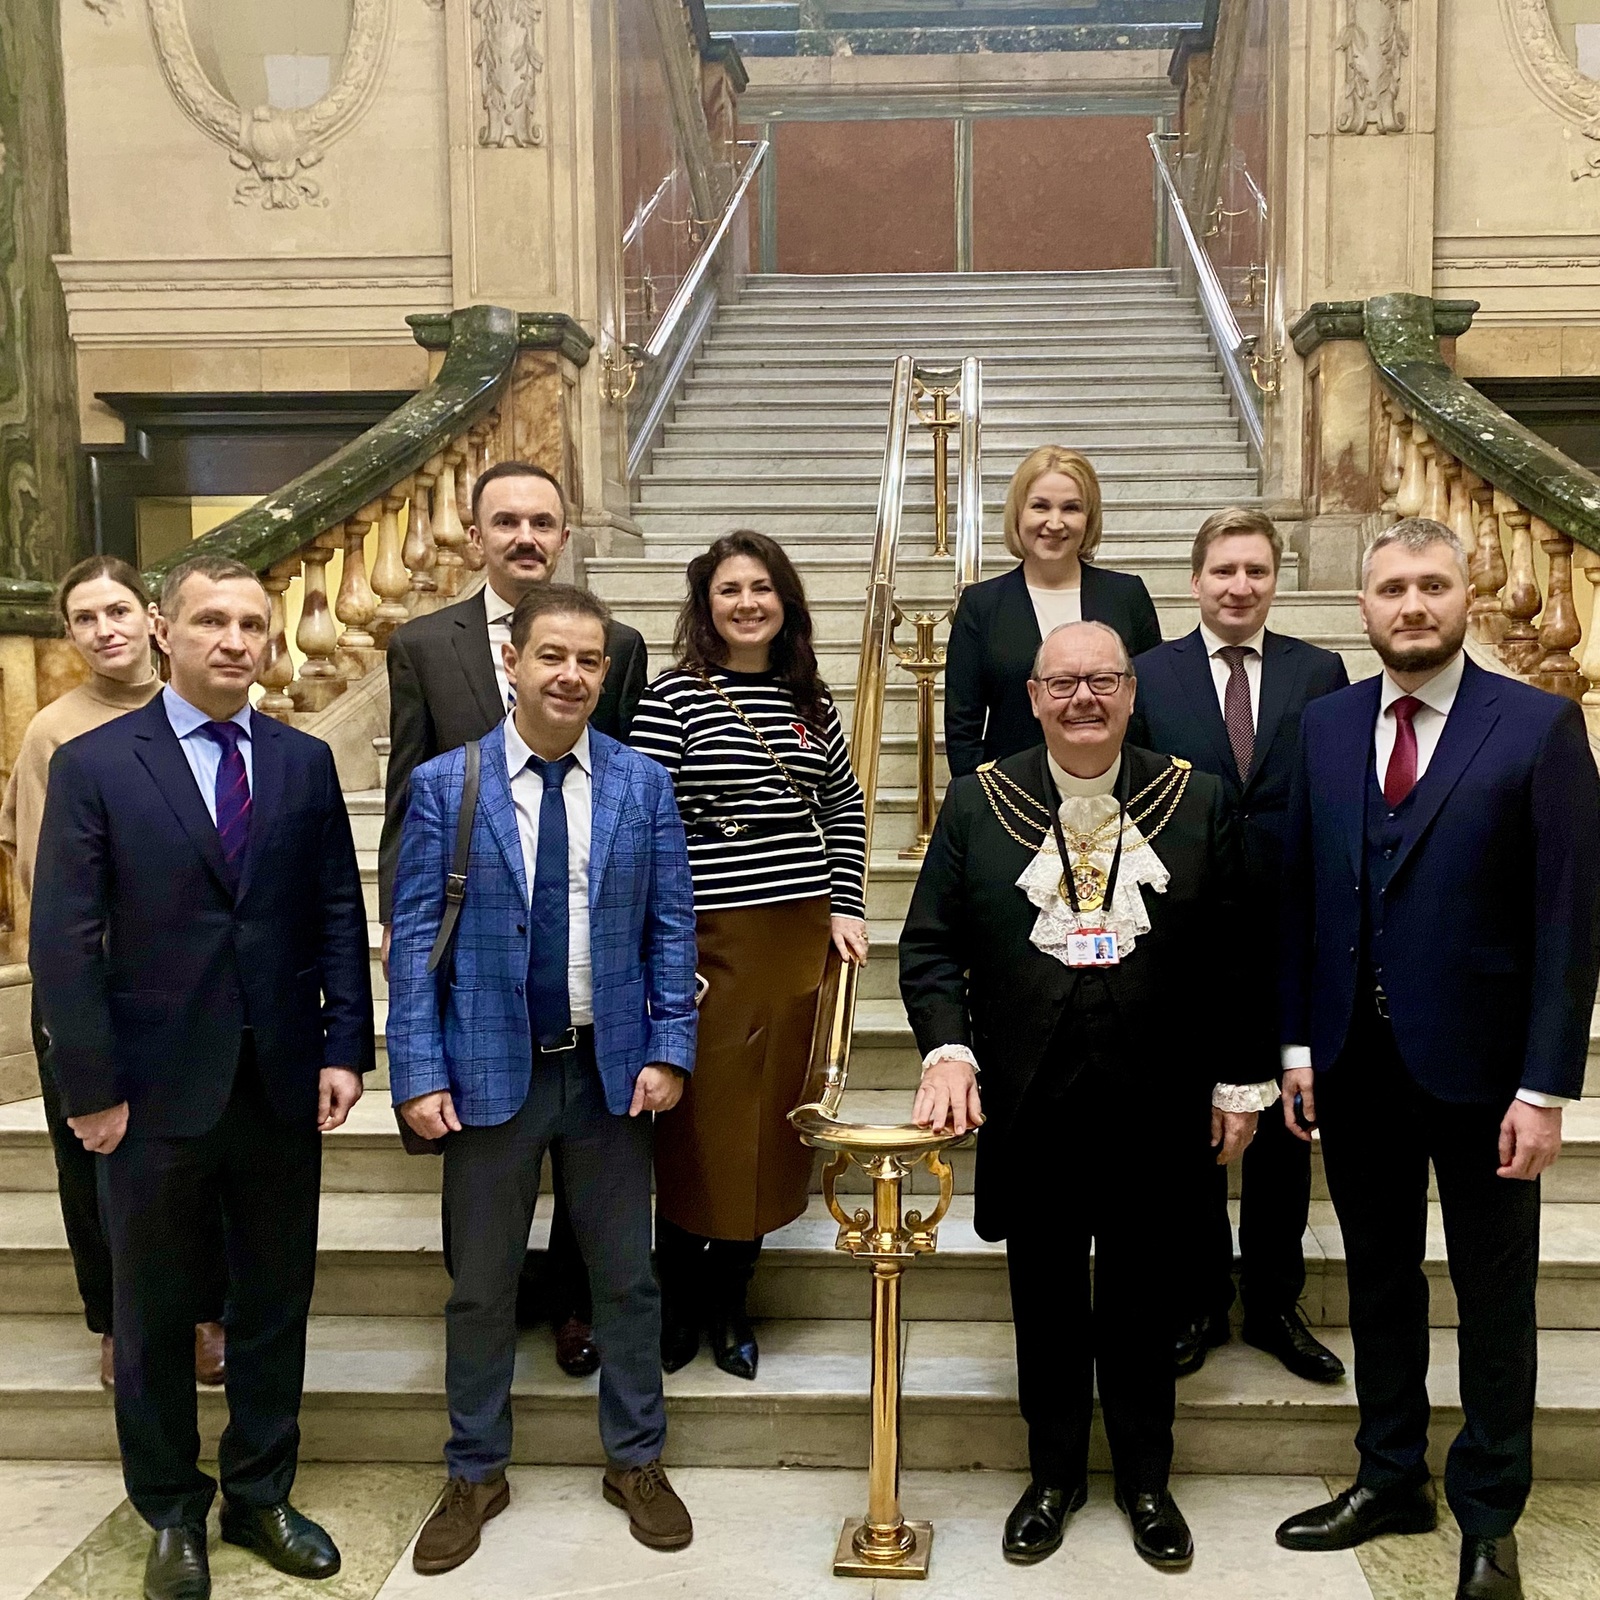 22 Feb 23 - A pleasure to renew friendships and host a senior delegation from Kyiv at the Old Bailey. Discussions included the rule of law and its importance in facilitating international trade. 